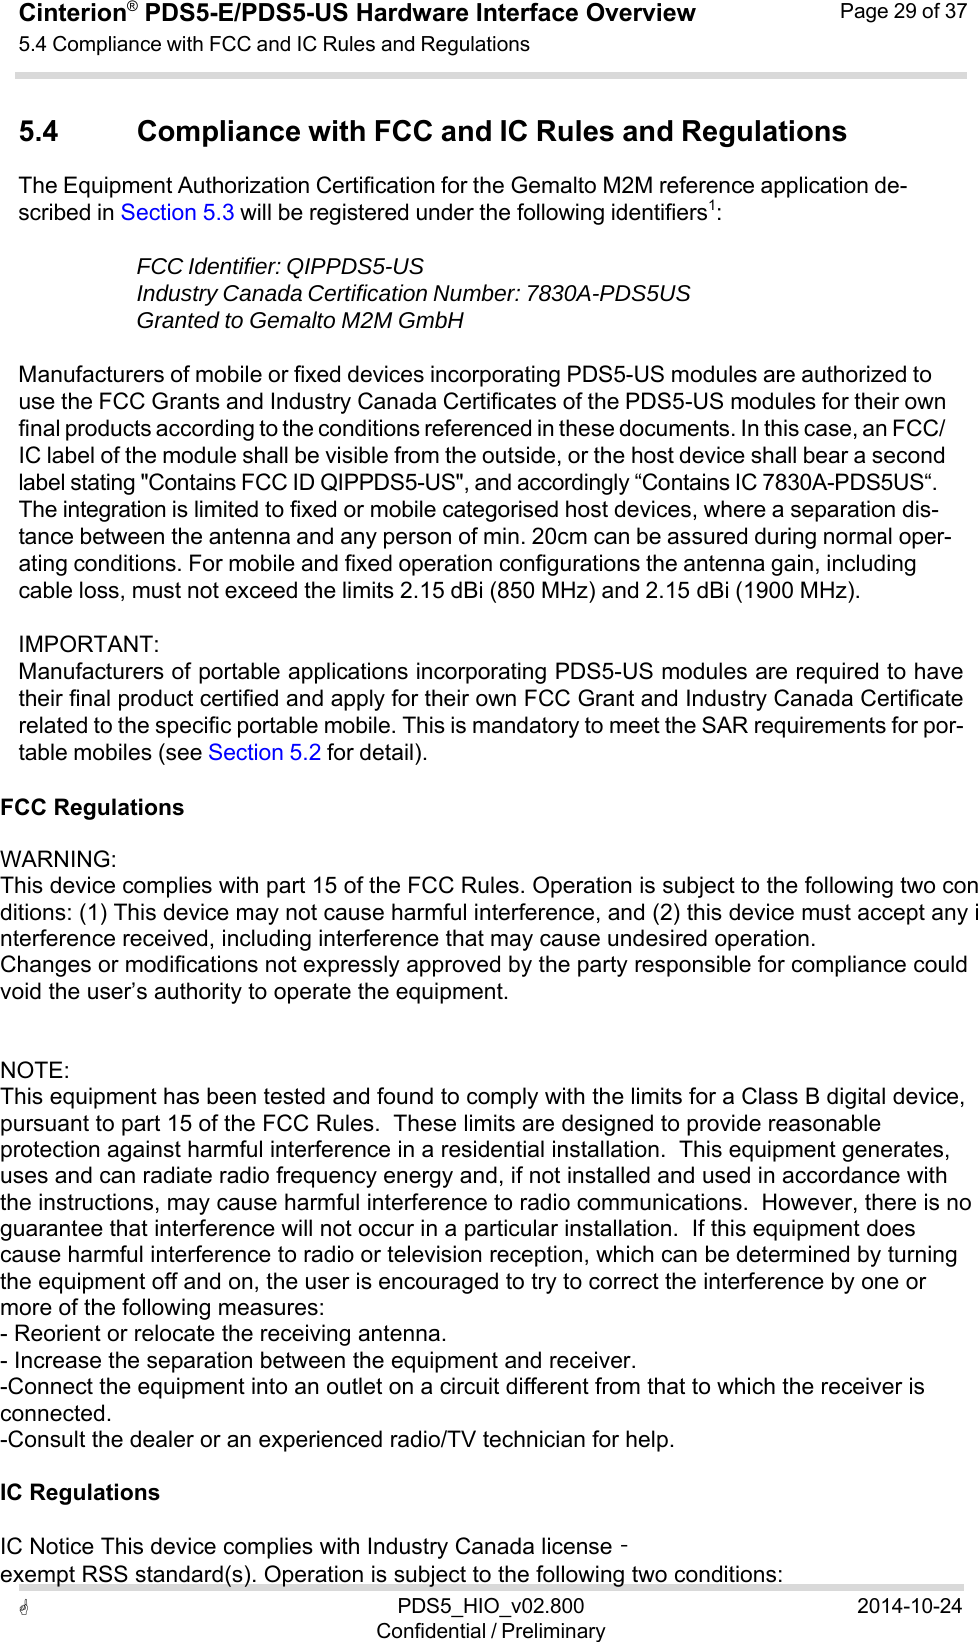  PDS5_HIO_v02.800Confidential / Preliminary2014-10-24Cinterion®  PDS5-E/PDS5-US Hardware Interface Overview5.4 Compliance with FCC and IC Rules and Regulations Page 29 of 37   5.4 Compliance with FCC and IC Rules and Regulations The Equipment Authorization Certification for the Gemalto M2M reference application de- scribed in Section 5.3 will be registered under the following identifiers1:  FCC Identifier: QIPPDS5-US Industry Canada Certification Number: 7830A-PDS5US Granted to Gemalto M2M GmbH  Manufacturers of mobile or fixed devices incorporating PDS5-US modules are authorized to use the FCC Grants and Industry Canada Certificates of the PDS5-US modules for their own final products according to the conditions referenced in these documents. In this case, an FCC/ IC label of the module shall be visible from the outside, or the host device shall bear a second label stating &quot;Contains FCC ID QIPPDS5-US&quot;, and accordingly “Contains IC 7830A-PDS5US“. The integration is limited to fixed or mobile categorised host devices, where a separation dis- tance between the antenna and any person of min. 20cm can be assured during normal oper- ating conditions. For mobile and fixed operation configurations the antenna gain, including cable loss, must not exceed the limits 2.15 dBi (850 MHz) and 2.15 dBi (1900 MHz).  IMPORTANT: Manufacturers of portable applications incorporating PDS5-US modules are required to have their final product certified and apply for their own FCC Grant and Industry Canada Certificate related to the specific portable mobile. This is mandatory to meet the SAR requirements for por- table mobiles (see Section 5.2 for detail).  FCC Regulations    WARNING: This device complies with part 15 of the FCC Rules. Operation is subject to the following two conditions: (1) This device may not cause harmful interference, and (2) this device must accept any interference received, including interference that may cause undesired operation. Changes or modifications not expressly approved by the party responsible for compliance could void the user’s authority to operate the equipment.    NOTE:  This equipment has been tested and found to comply with the limits for a Class B digital device, pursuant to part 15 of the FCC Rules.  These limits are designed to provide reasonable protection against harmful interference in a residential installation.  This equipment generates, uses and can radiate radio frequency energy and, if not installed and used in accordance with the instructions, may cause harmful interference to radio communications.  However, there is no guarantee that interference will not occur in a particular installation.  If this equipment does cause harmful interference to radio or television reception, which can be determined by turning the equipment off and on, the user is encouraged to try to correct the interference by one or more of the following measures: - Reorient or relocate the receiving antenna. - Increase the separation between the equipment and receiver. -Connect the equipment into an outlet on a circuit different from that to which the receiver is connected. -Consult the dealer or an experienced radio/TV technician for help.   IC Regulations    IC Notice This device complies with Industry Canada license‐exempt RSS standard(s). Operation is subject to the following two conditions:  